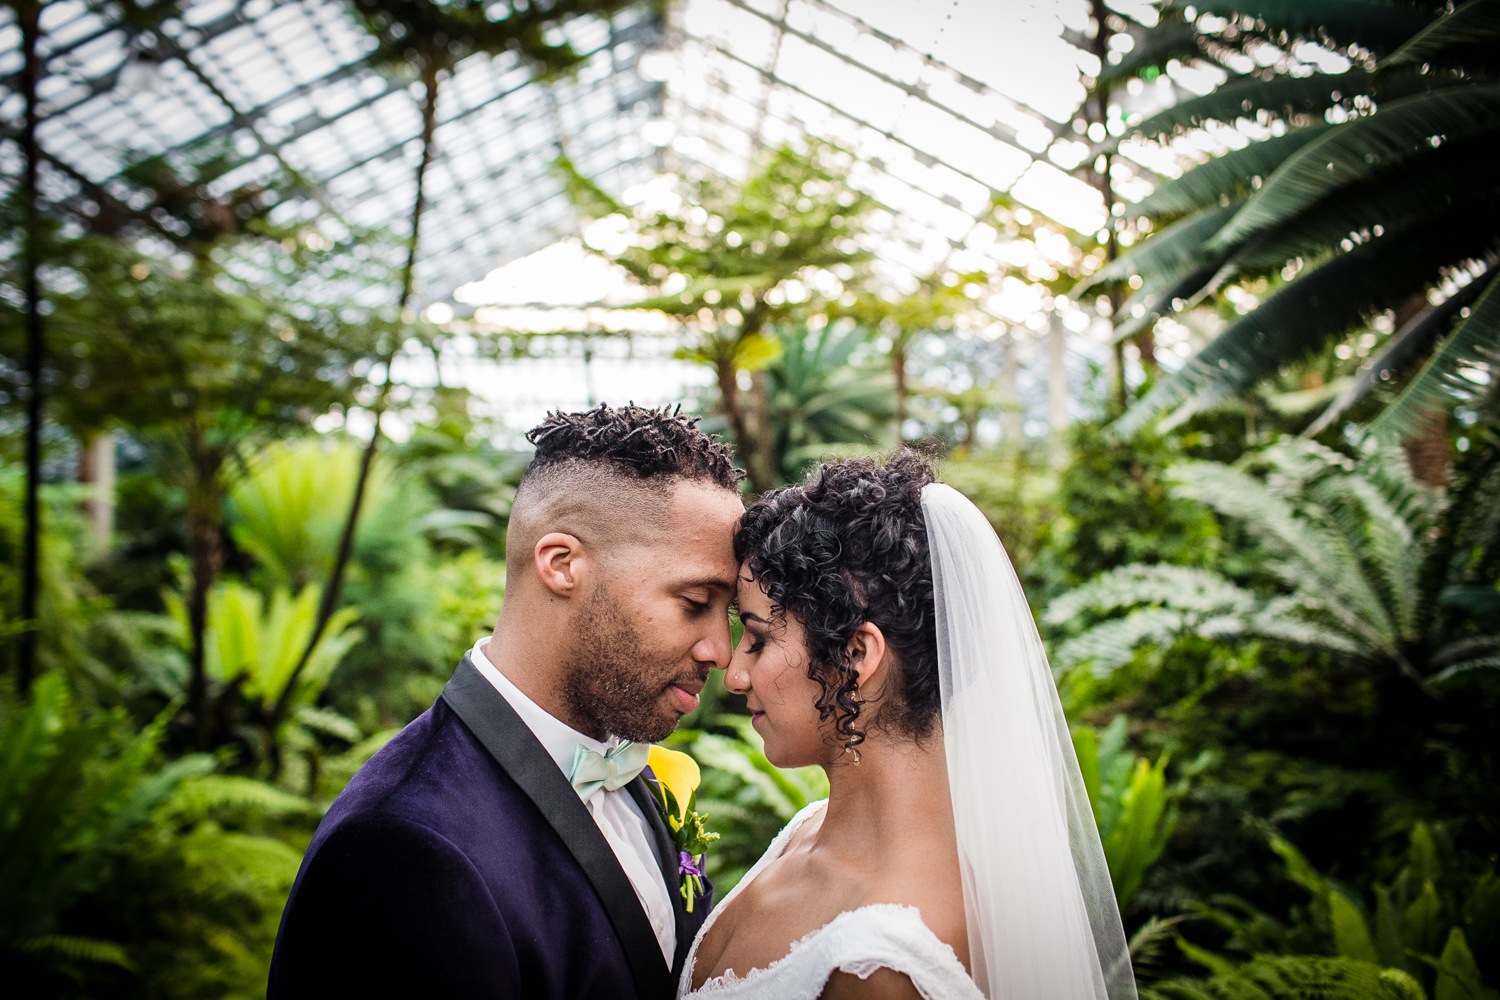 A wedding portrait at the Garfield Park Conservatory in Chicago. 